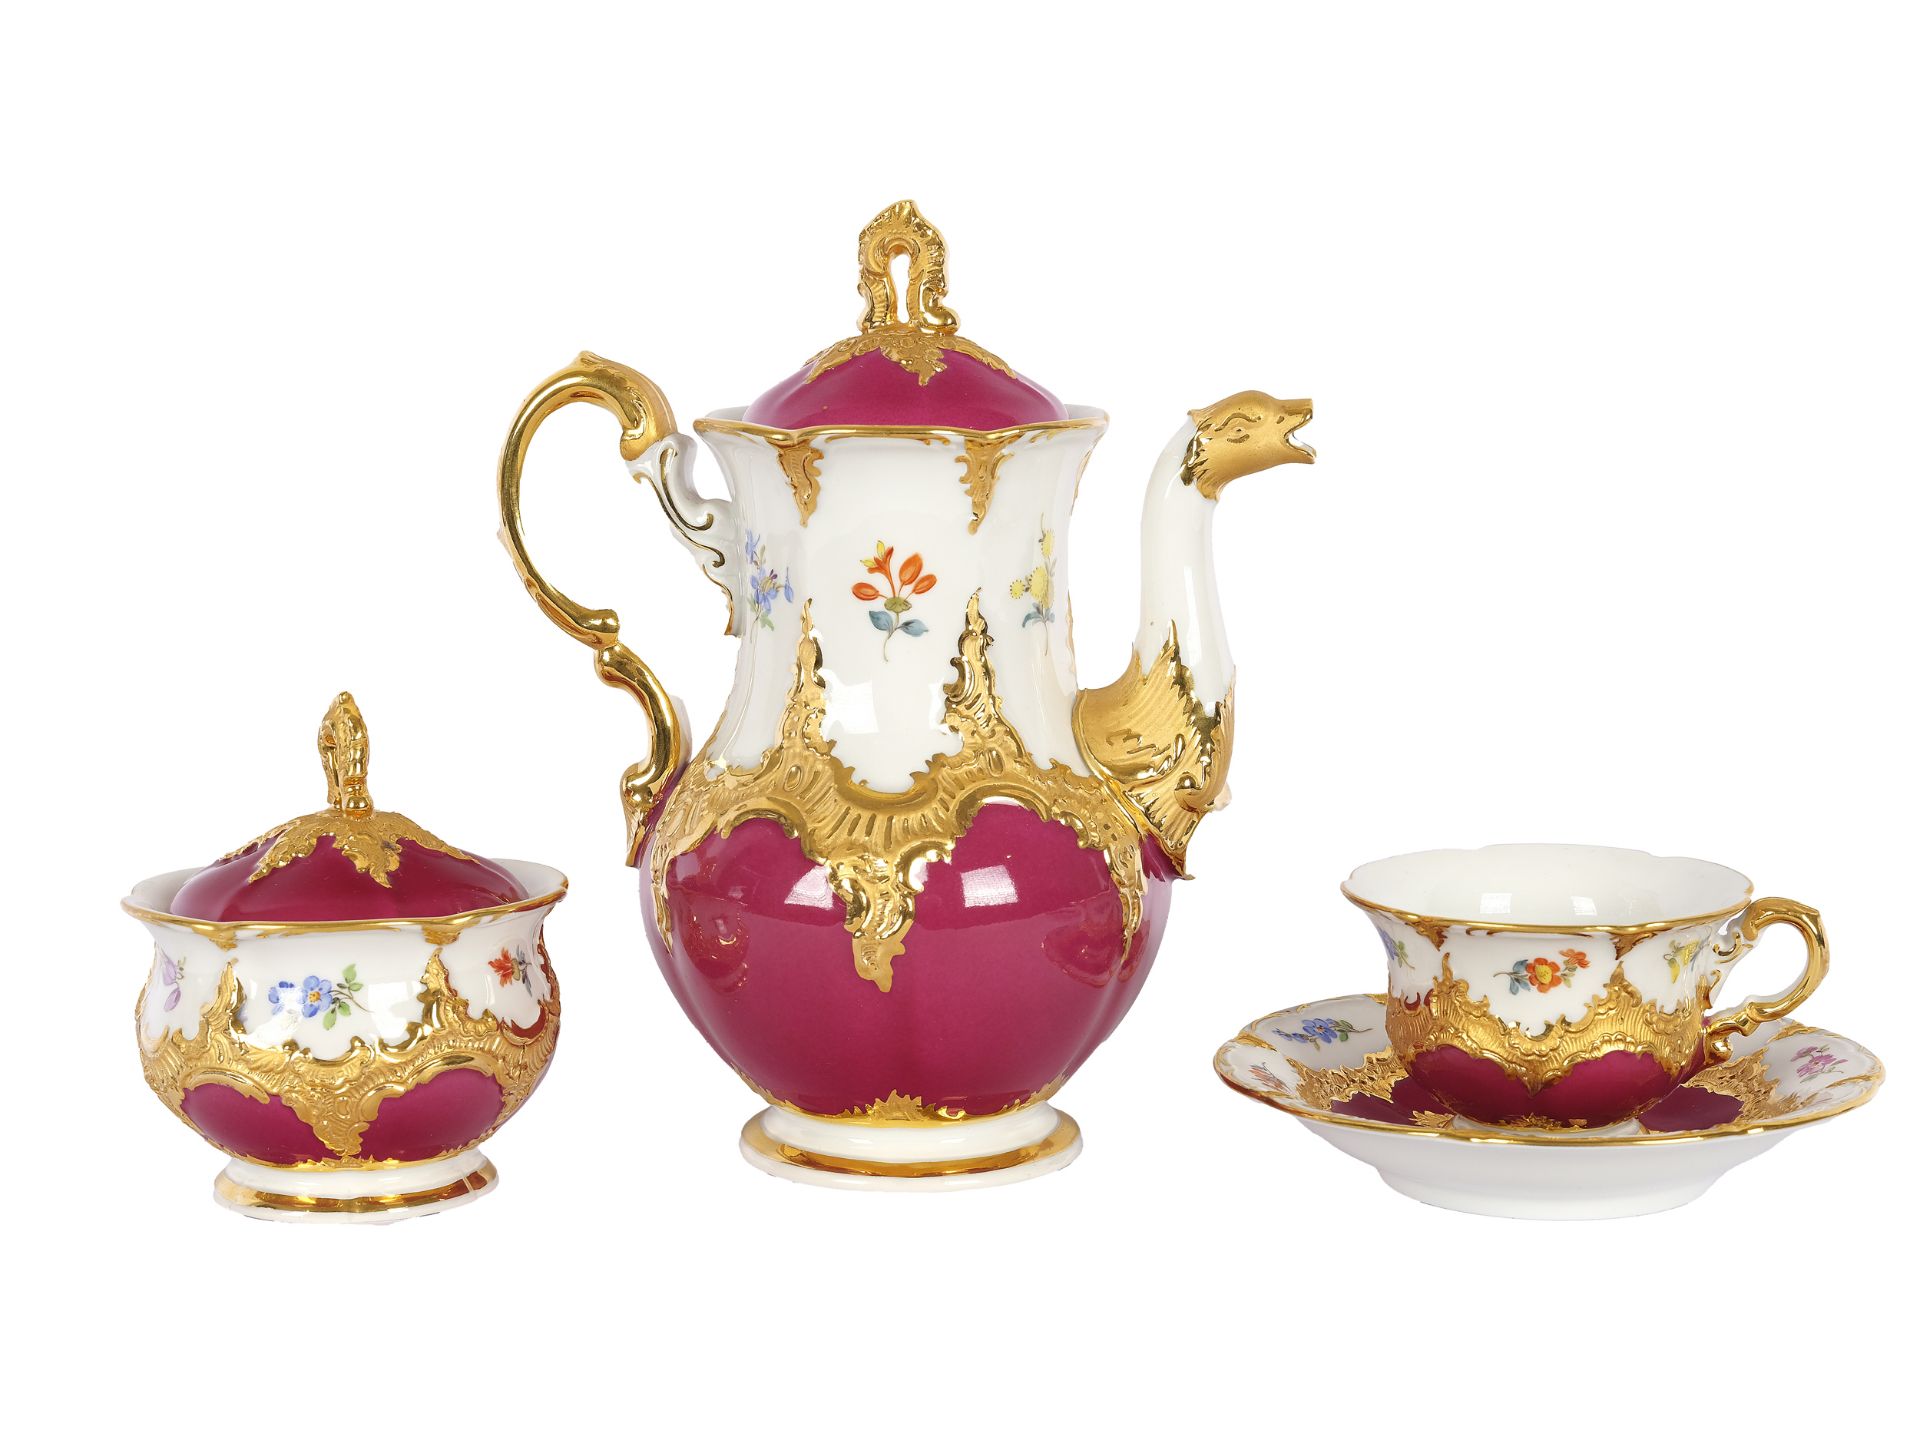 Mocha set for 4 persons, 15-piece, Meissen, B-shape decor, purple with scattered flowers - Image 4 of 6